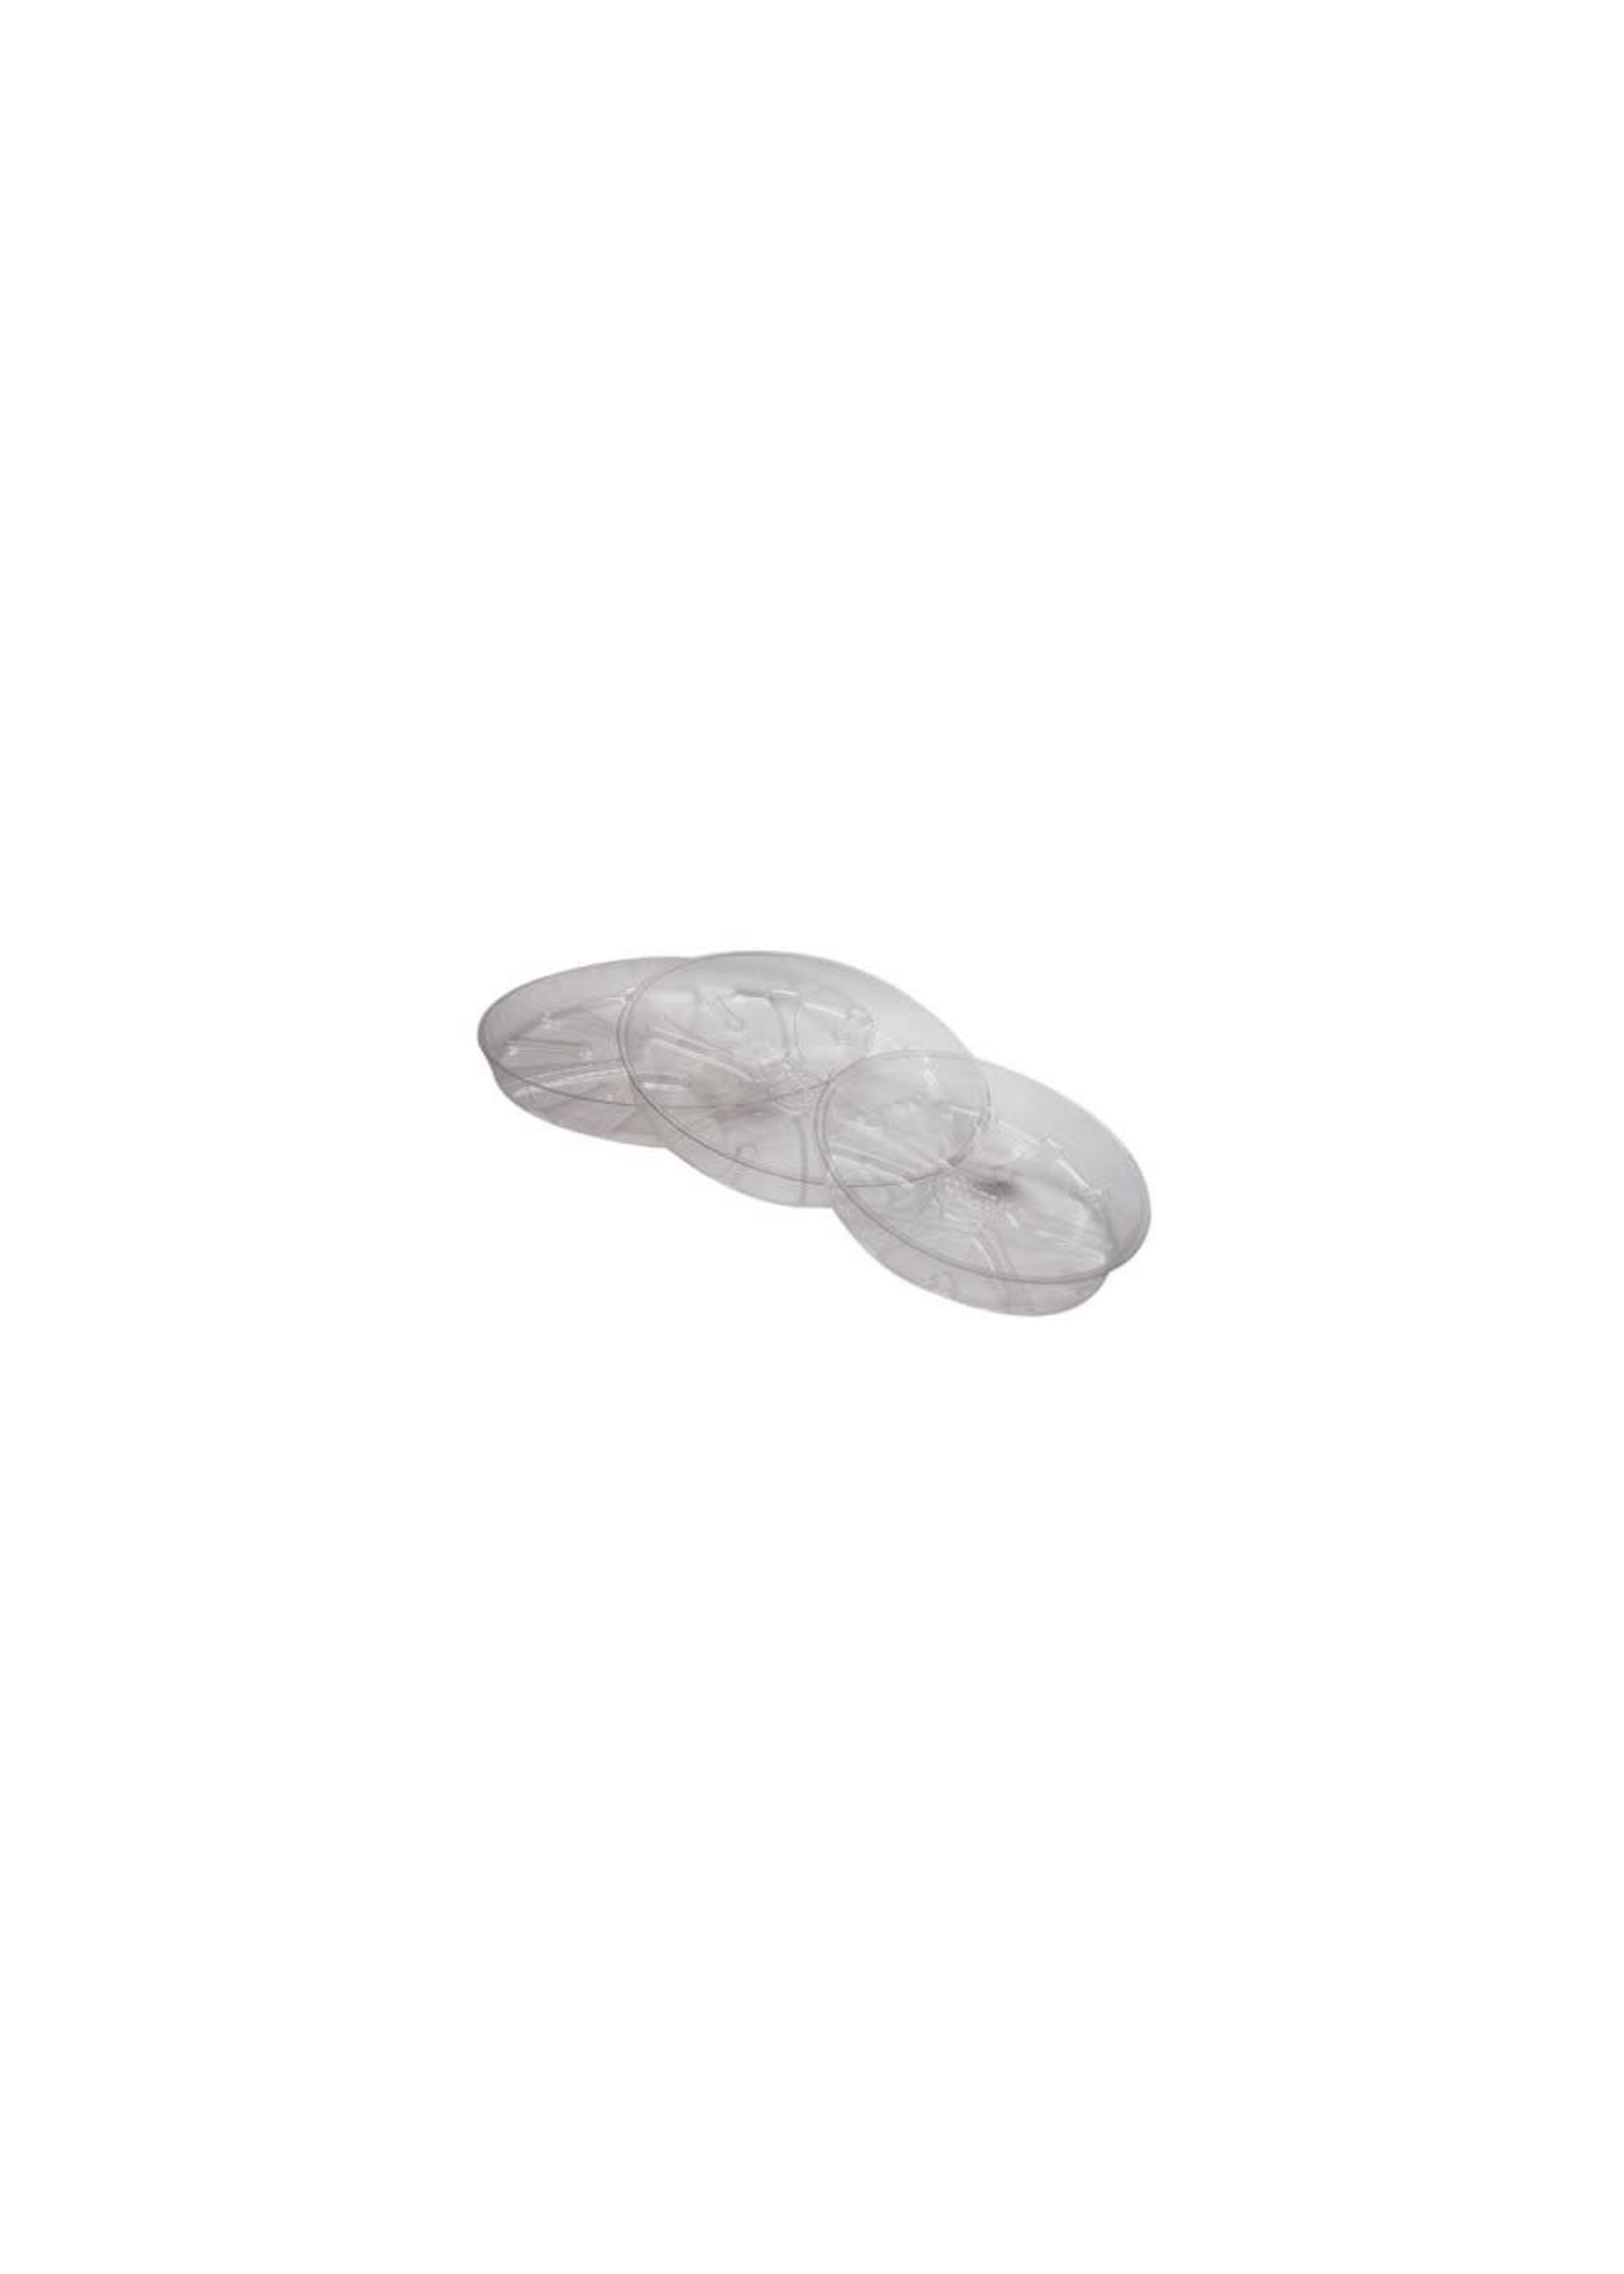 SAUCER 6" CLEAR PLASTIC